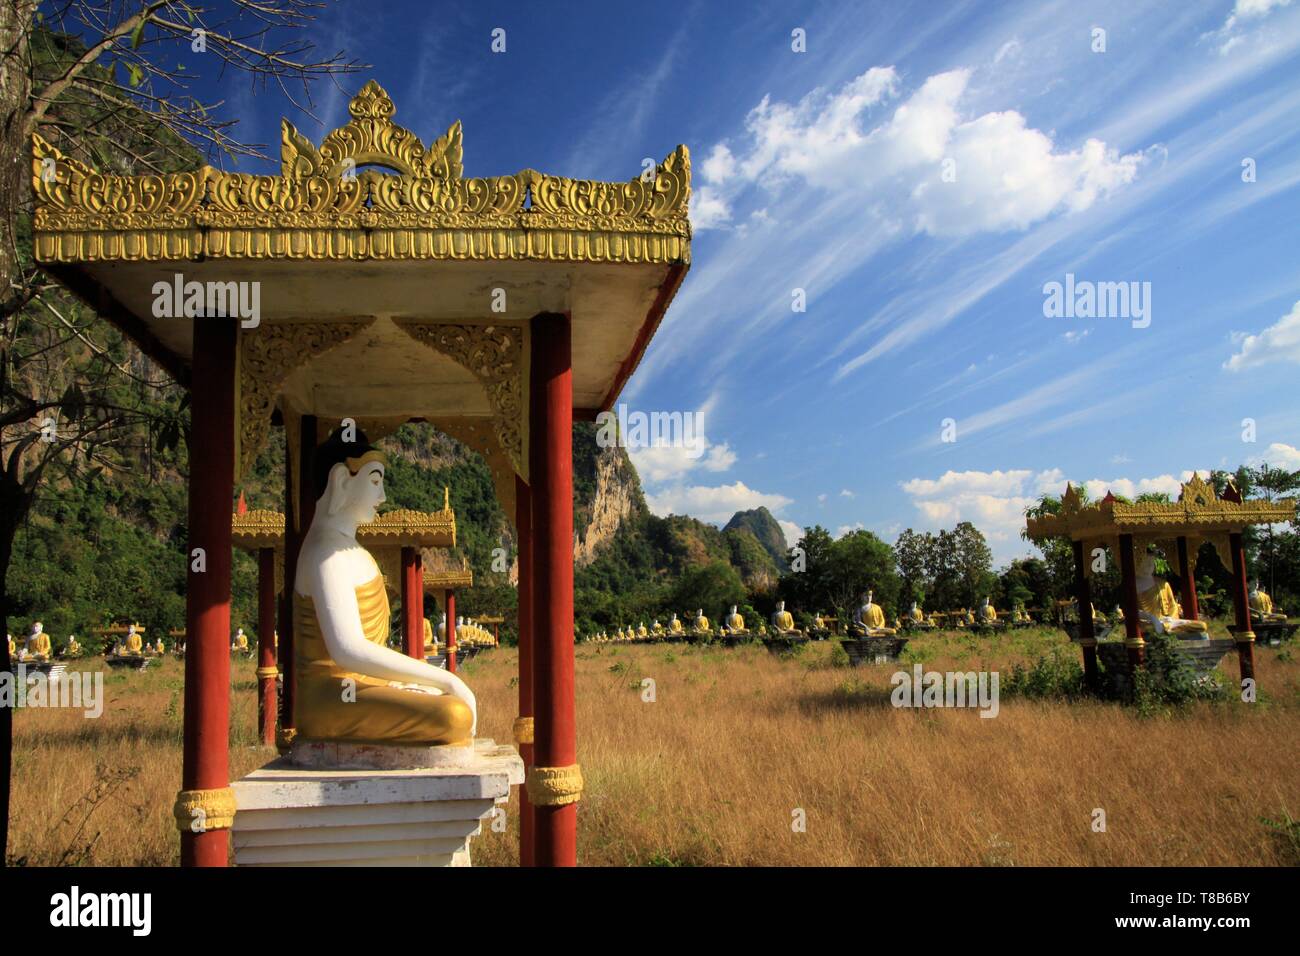 Lumbini Garden, Hpa An, Myanmar: View on secluded isolated valley with over 1000 sitting buddha statues in rows contrasting with blue sky and drifting Stock Photo